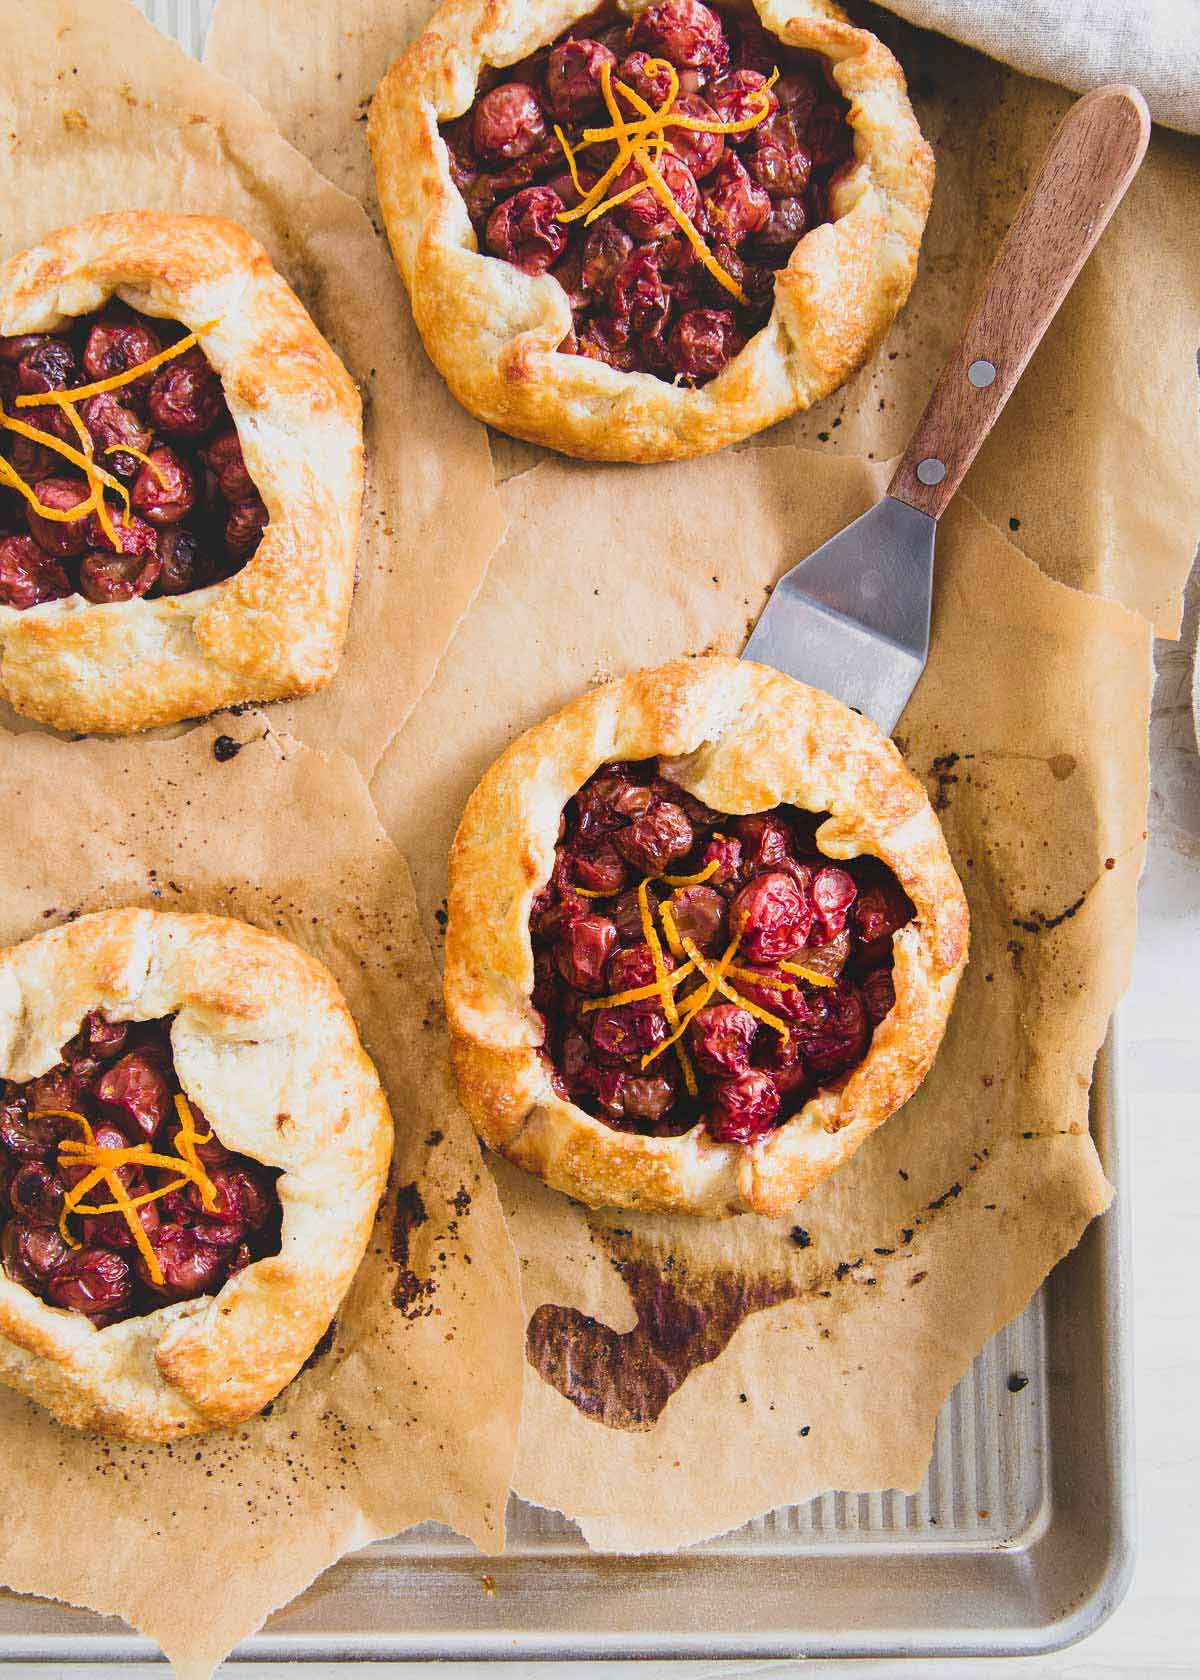 Tart cherries are brightened with fresh orange zest in these mini galettes for a rustic and delicious dessert.